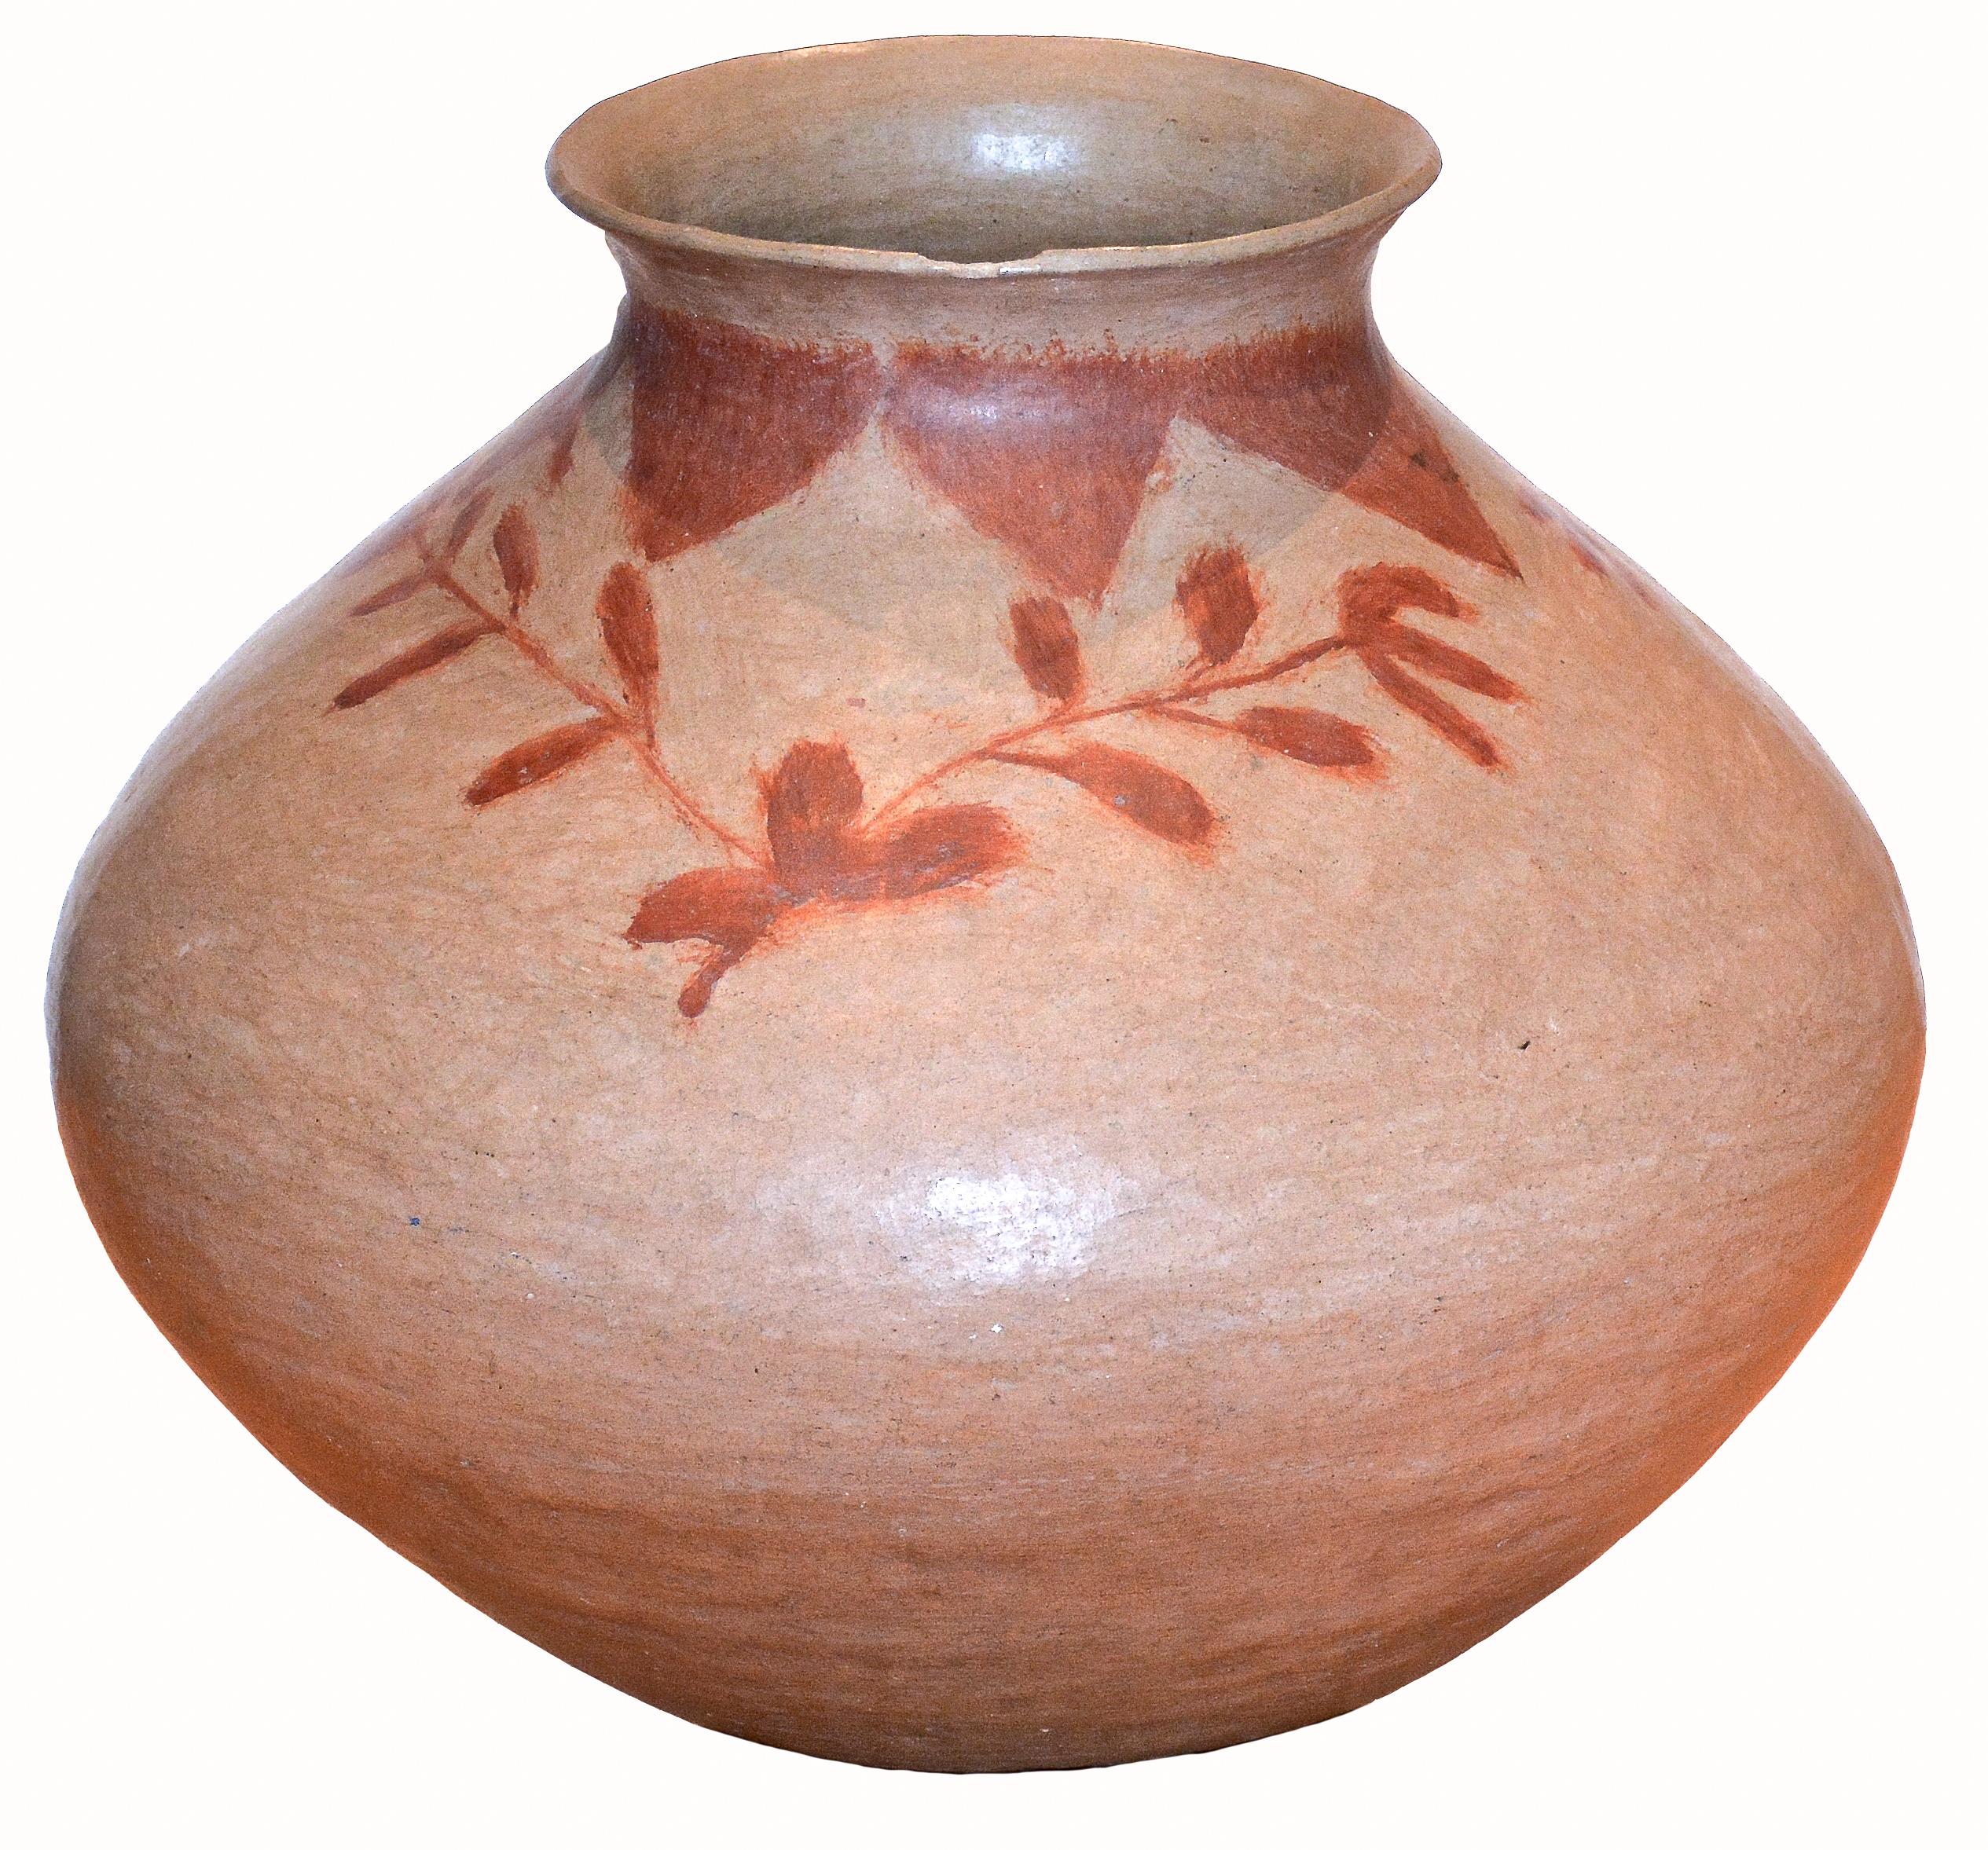 Large Tarahumara Indian Water Pot painted with Floral Design
Sierra Tarahumara Mountains, Chihuahua, Mexico
1970s
Low fire clay.
17 inches H. x 16 inches in Diameter

An unusually large, vintage example of the Tarahumara Indian Water Pot